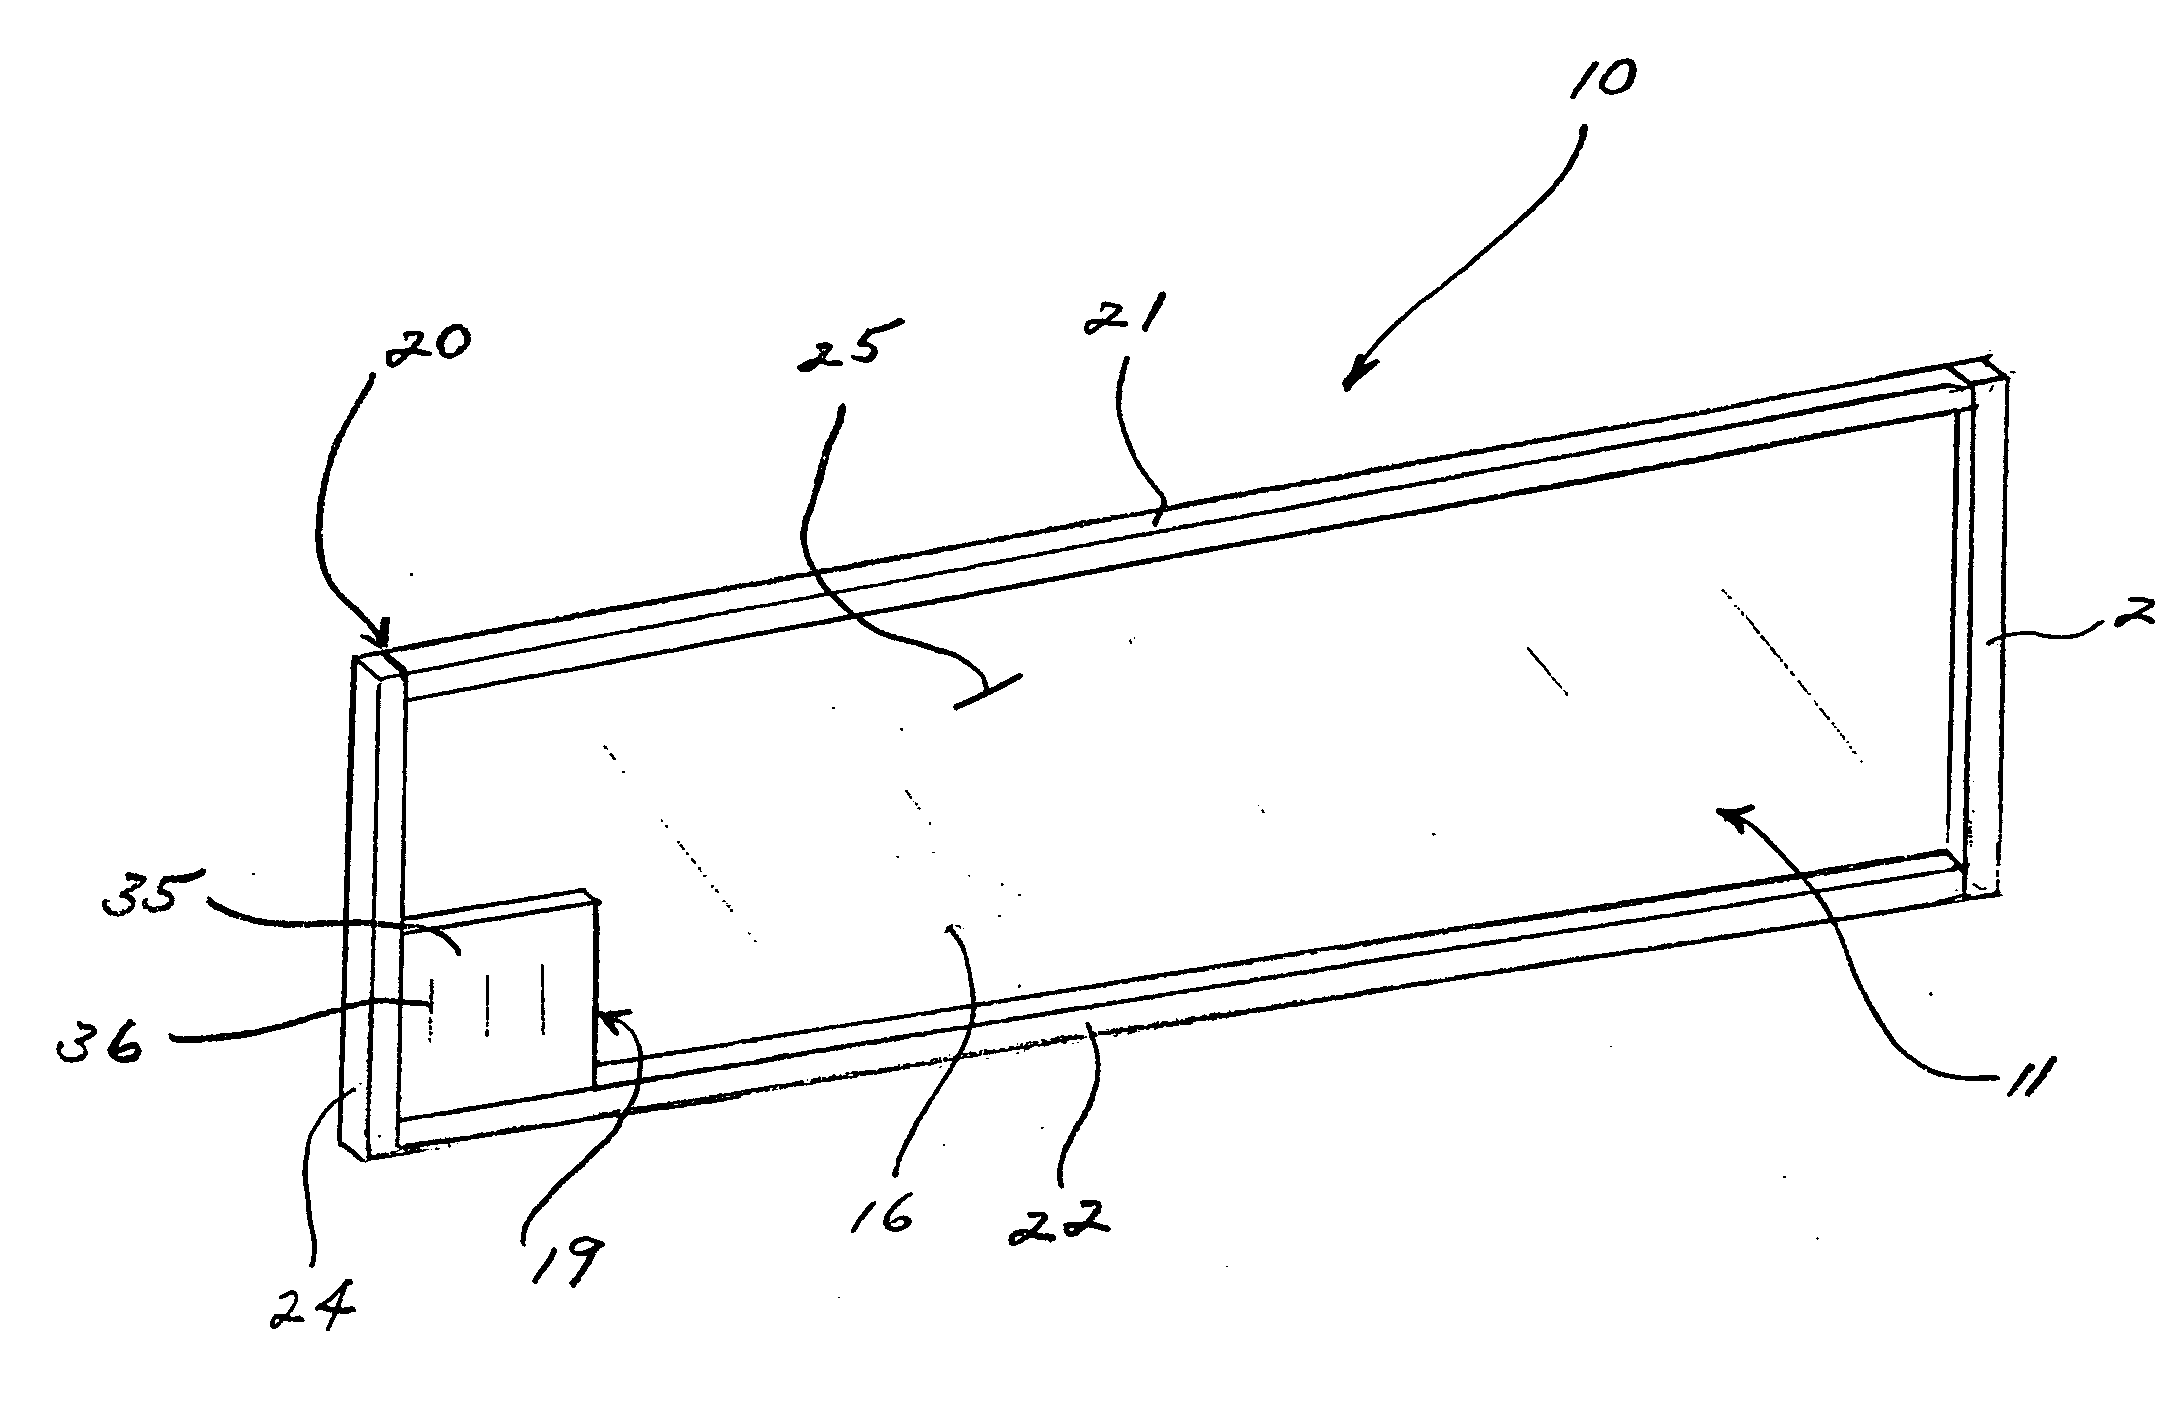 Sealing device for window and door openings with self-sealing pass-through opening